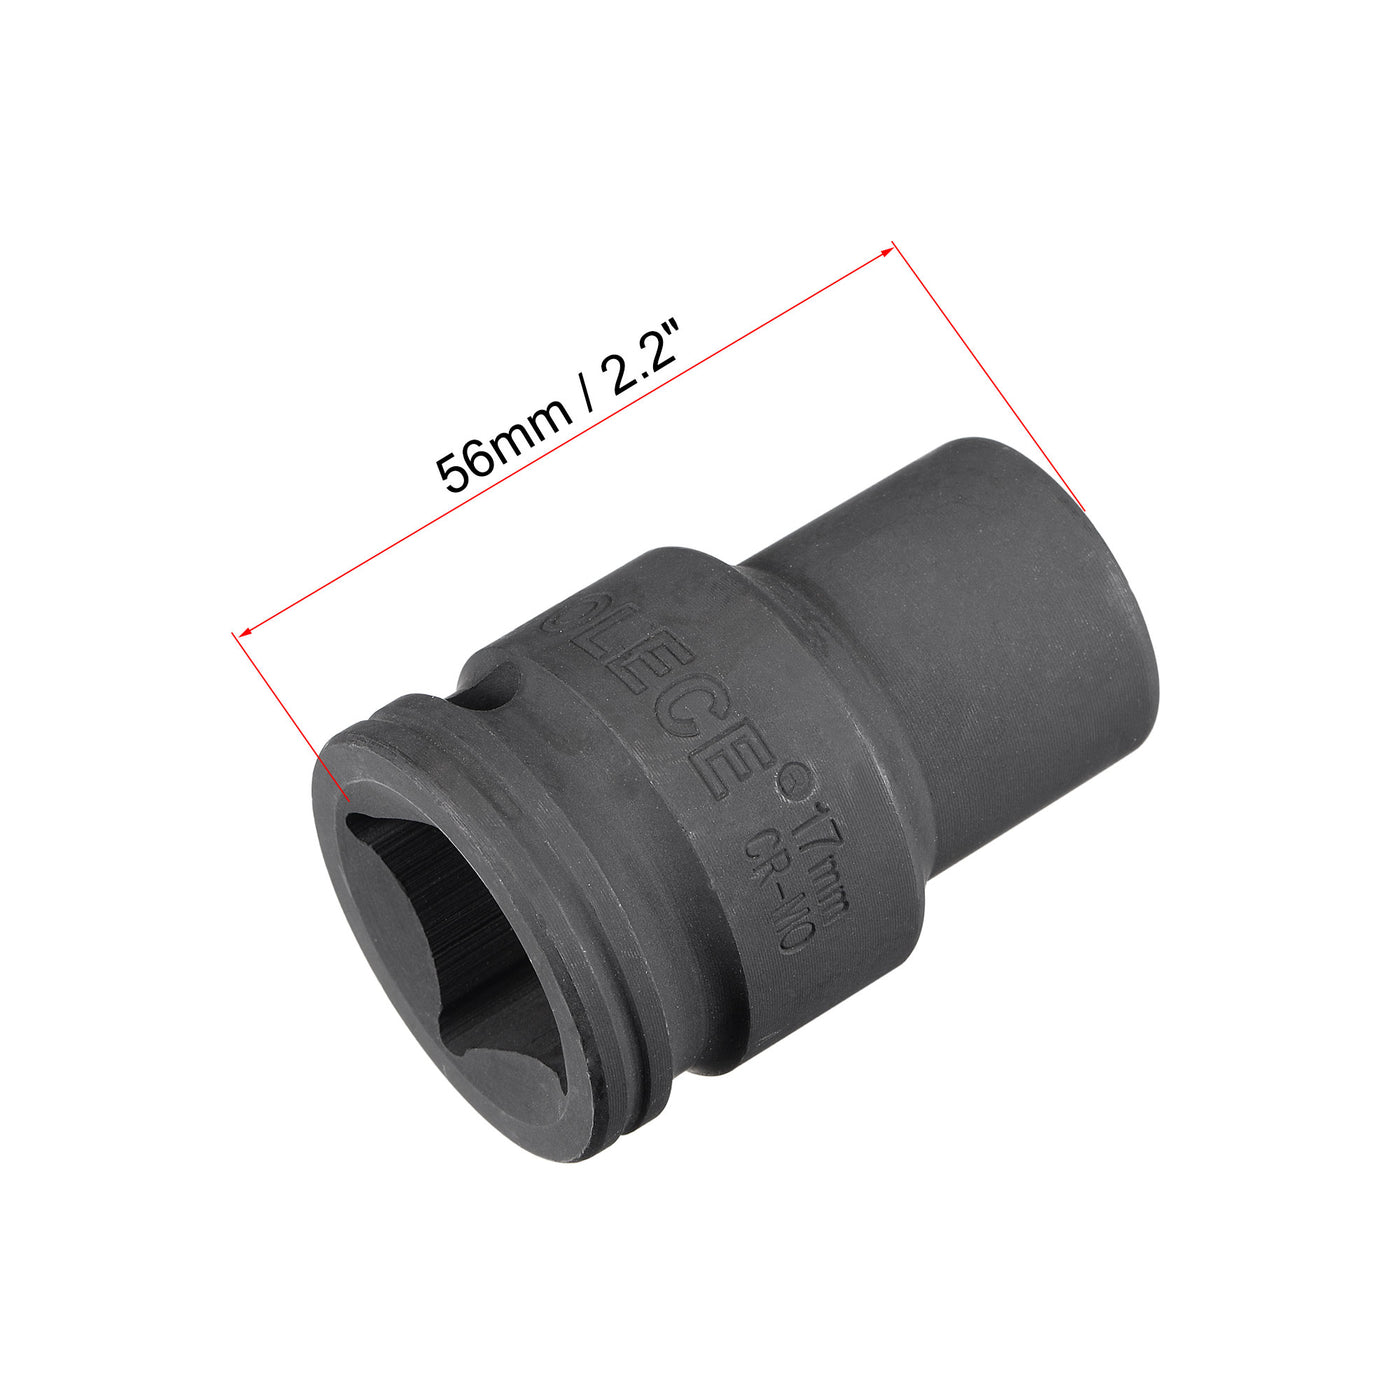 uxcell Uxcell 3/4" Drive 17mm 12-Point Impact Socket, CR-MO Steel 56mm Length, Standard Metric